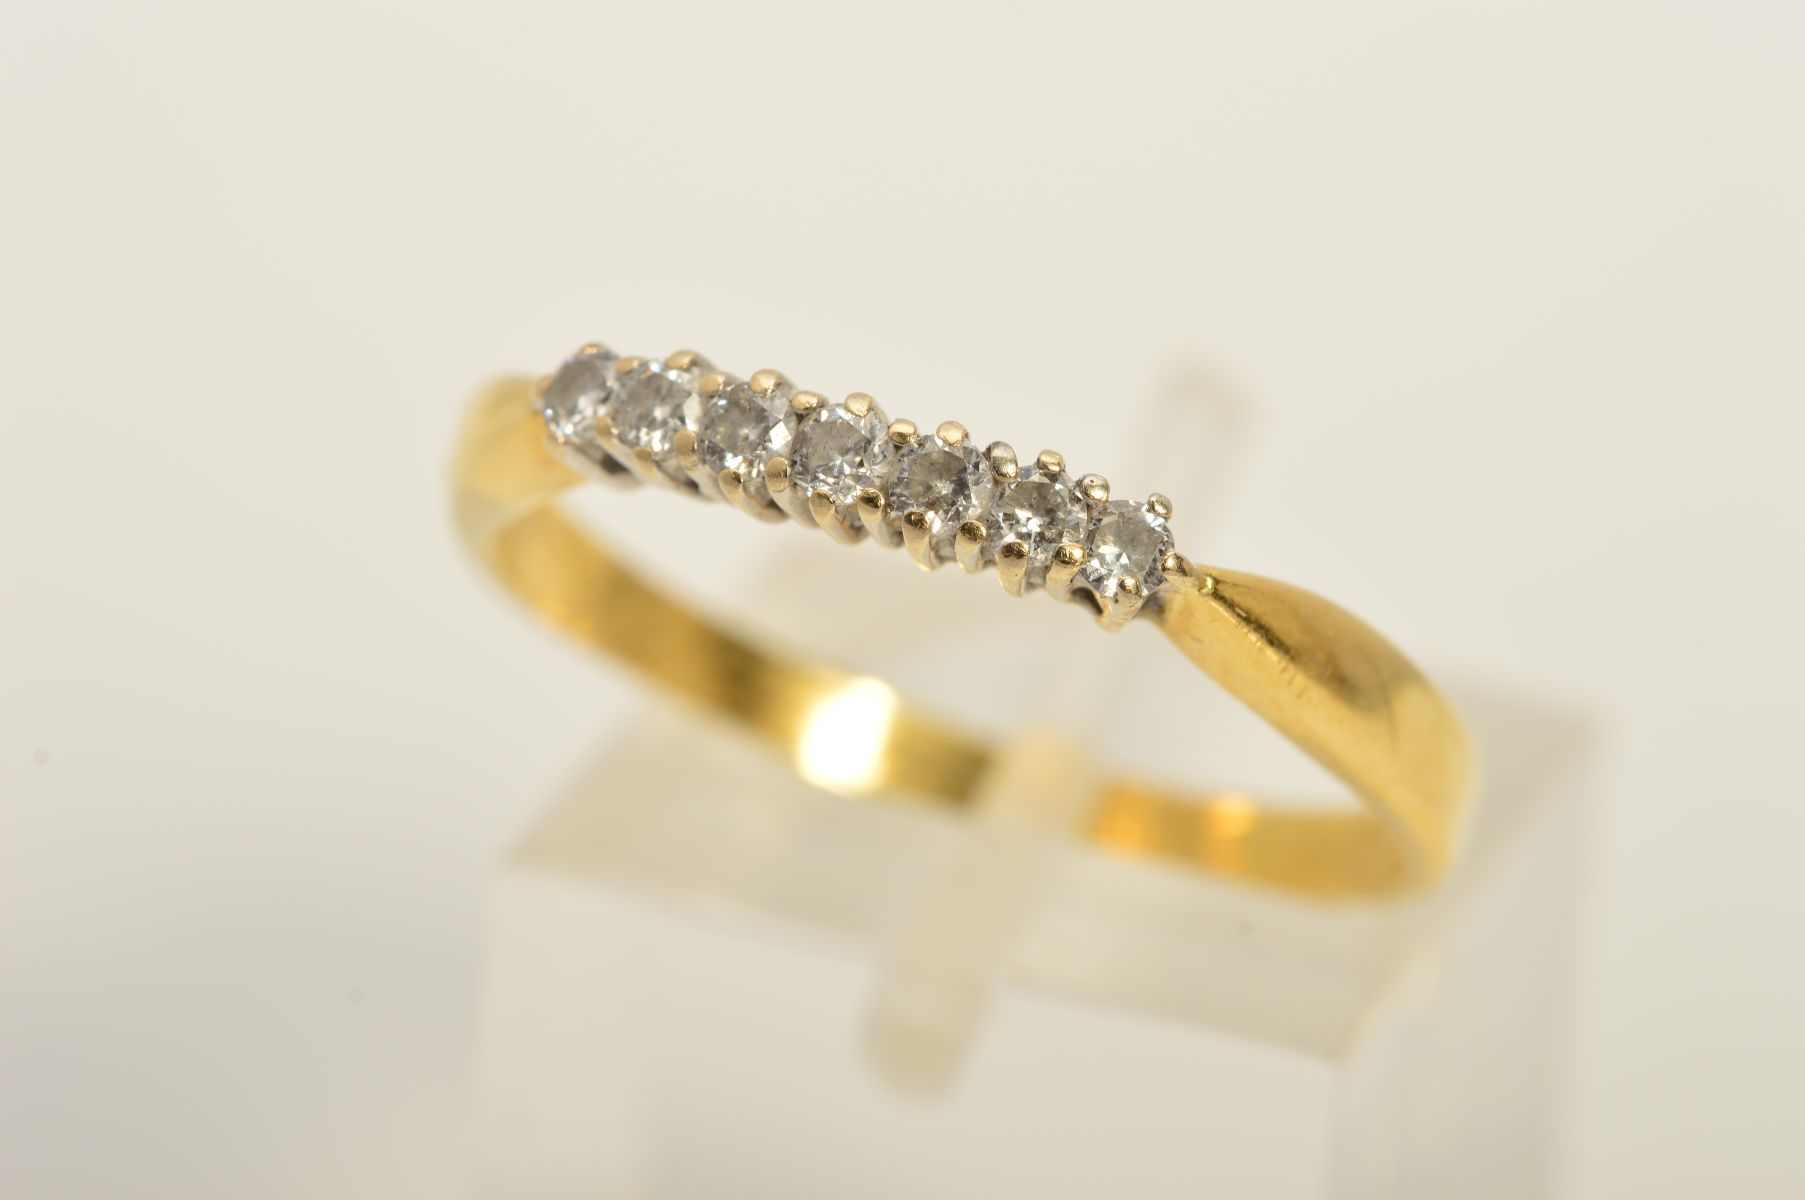 A GOLD SEVEN STONE DIAMOND RING, designed as a row of seven brilliant cut diamonds within claw